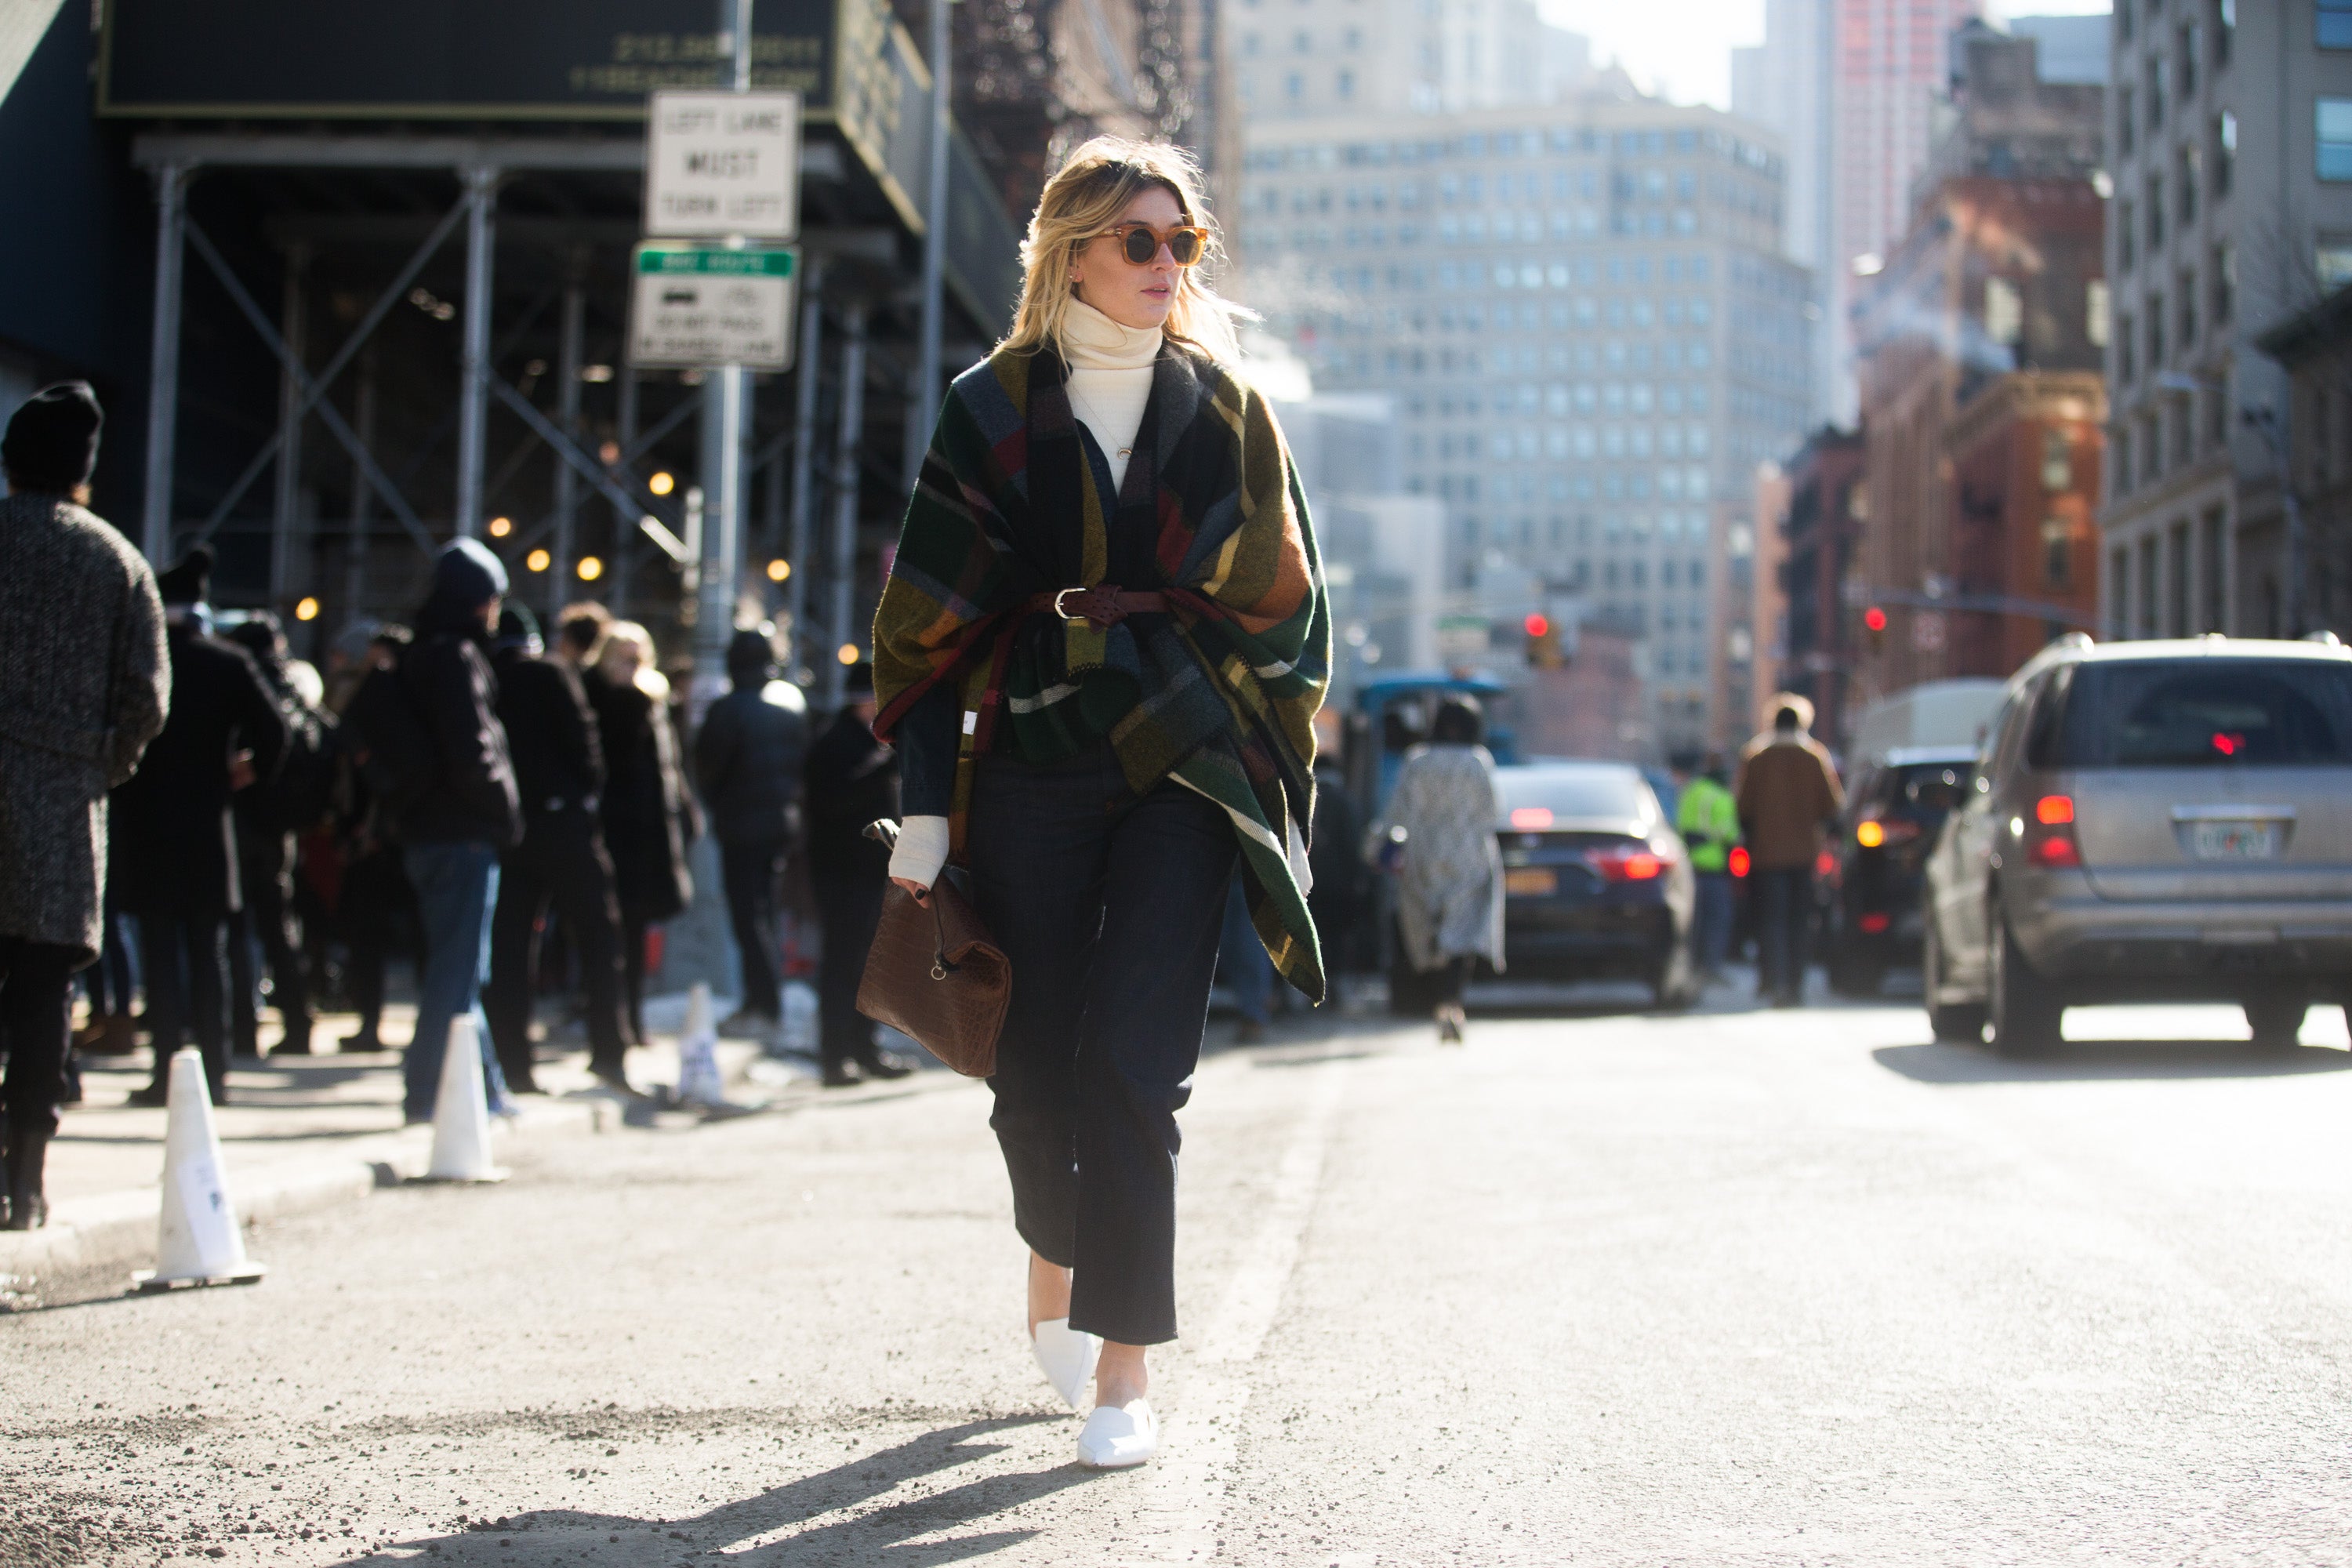 Camille Charriere in Jason Wu on the Streets of Manhattan on February 13, 2015 (Getty)